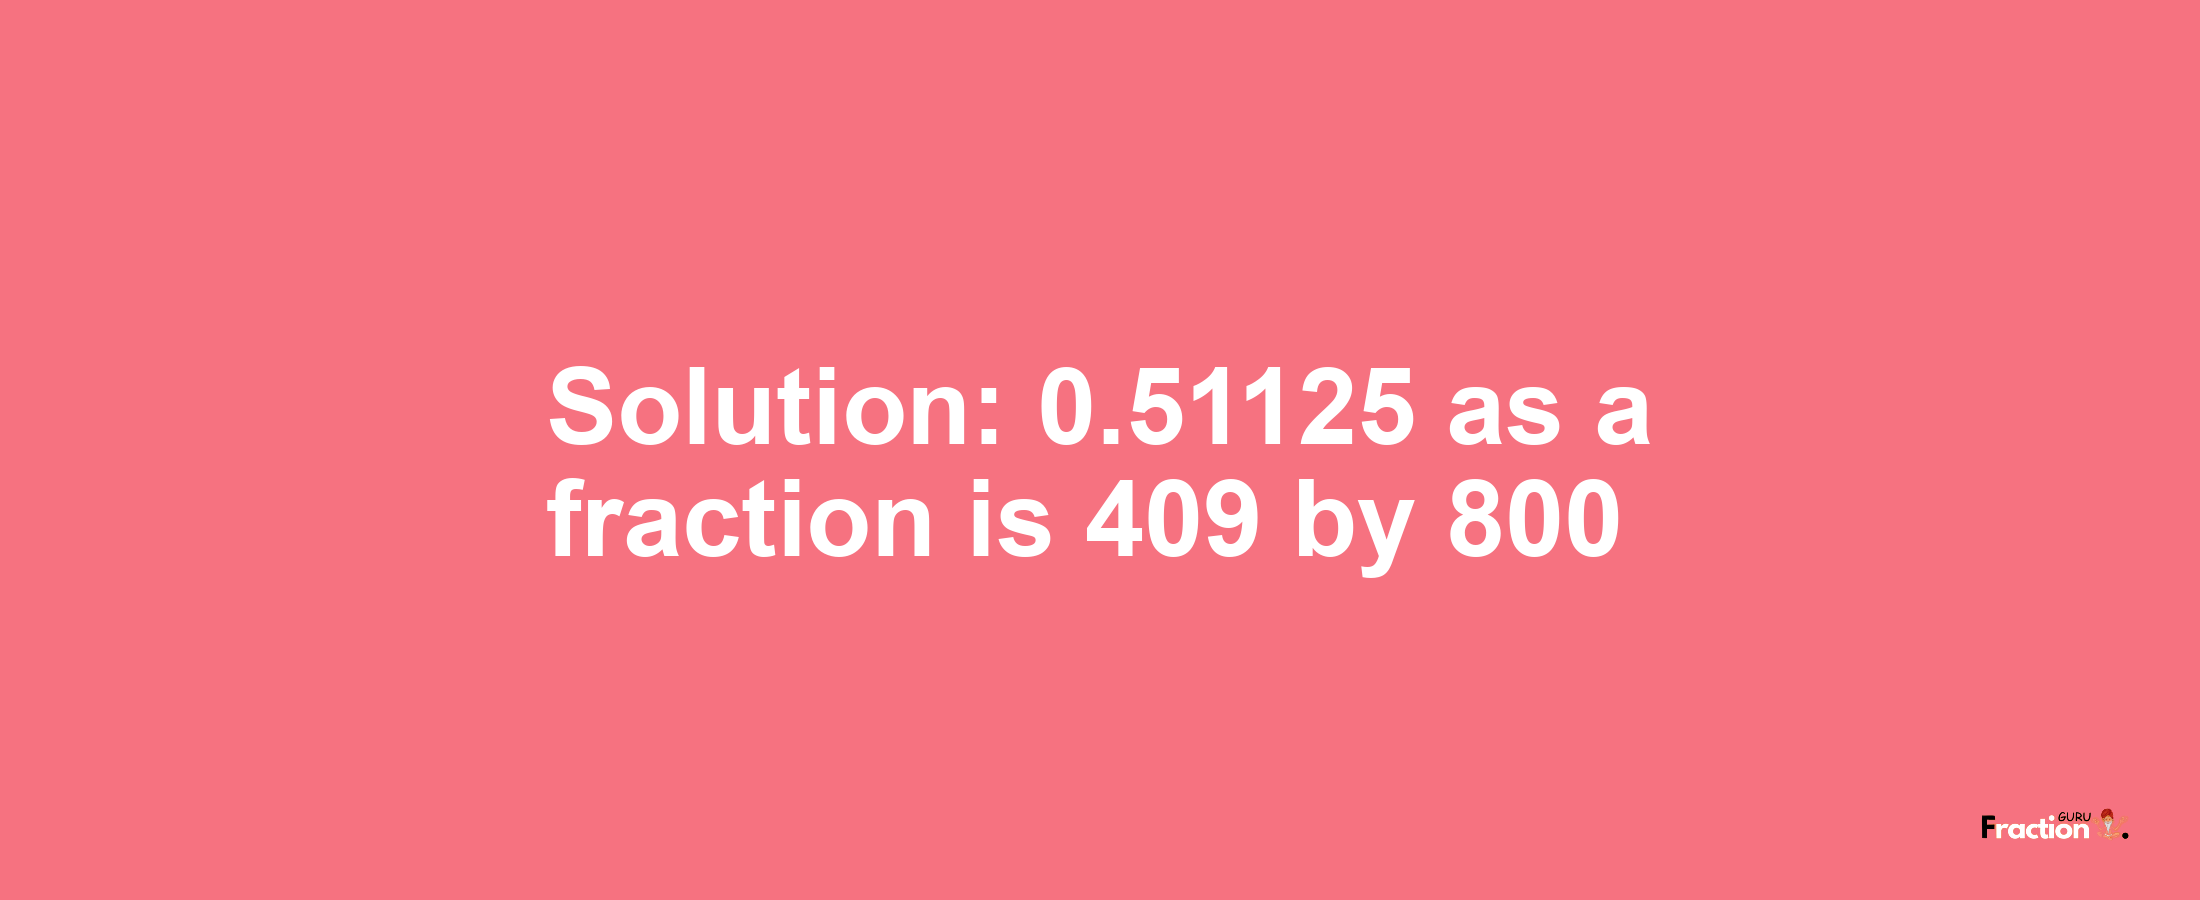 Solution:0.51125 as a fraction is 409/800